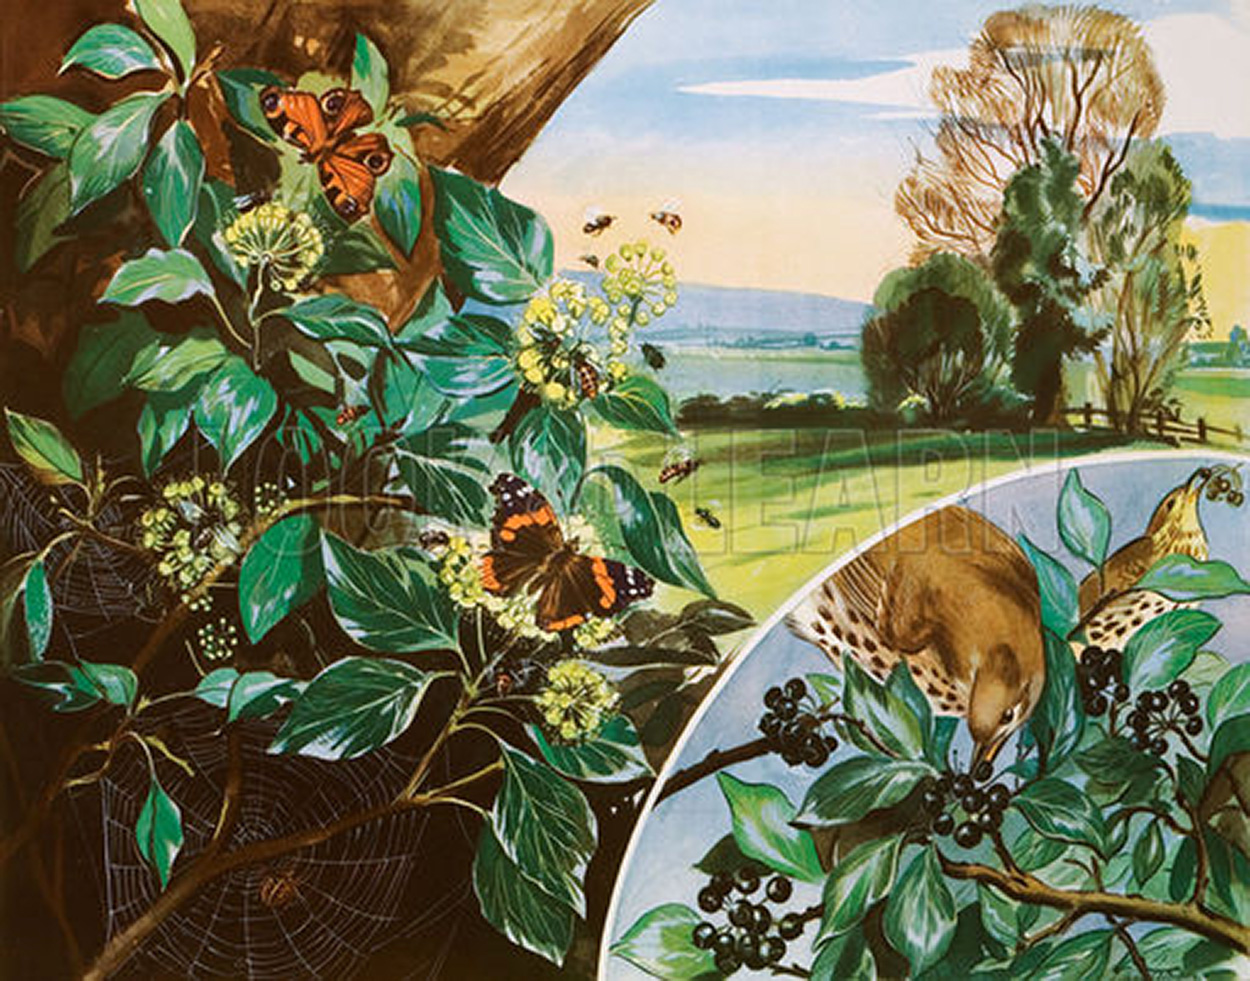 The Brownie and the Ivy (Original Macmillan Poster) (Print) art by Eileen Soper at The Illustration Art Gallery